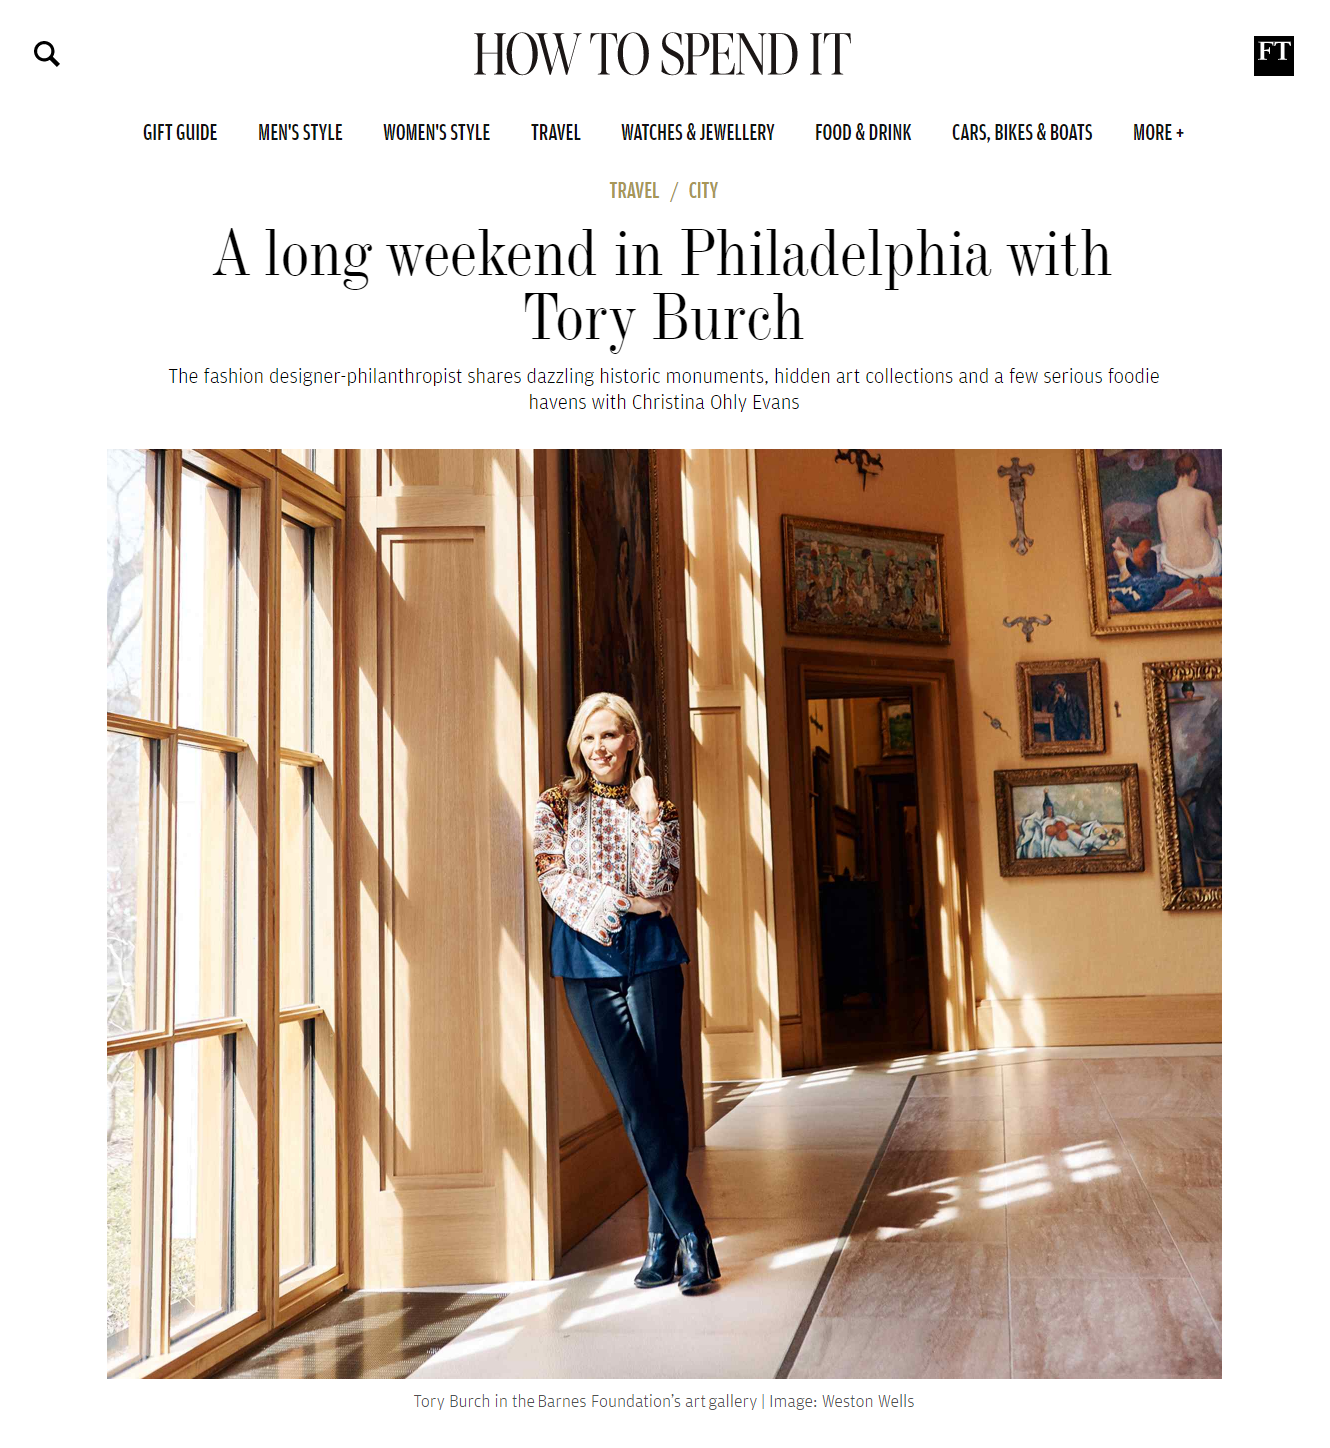 A long weekend in Philadelphia with Tory Burch — Christina Ohly Evans